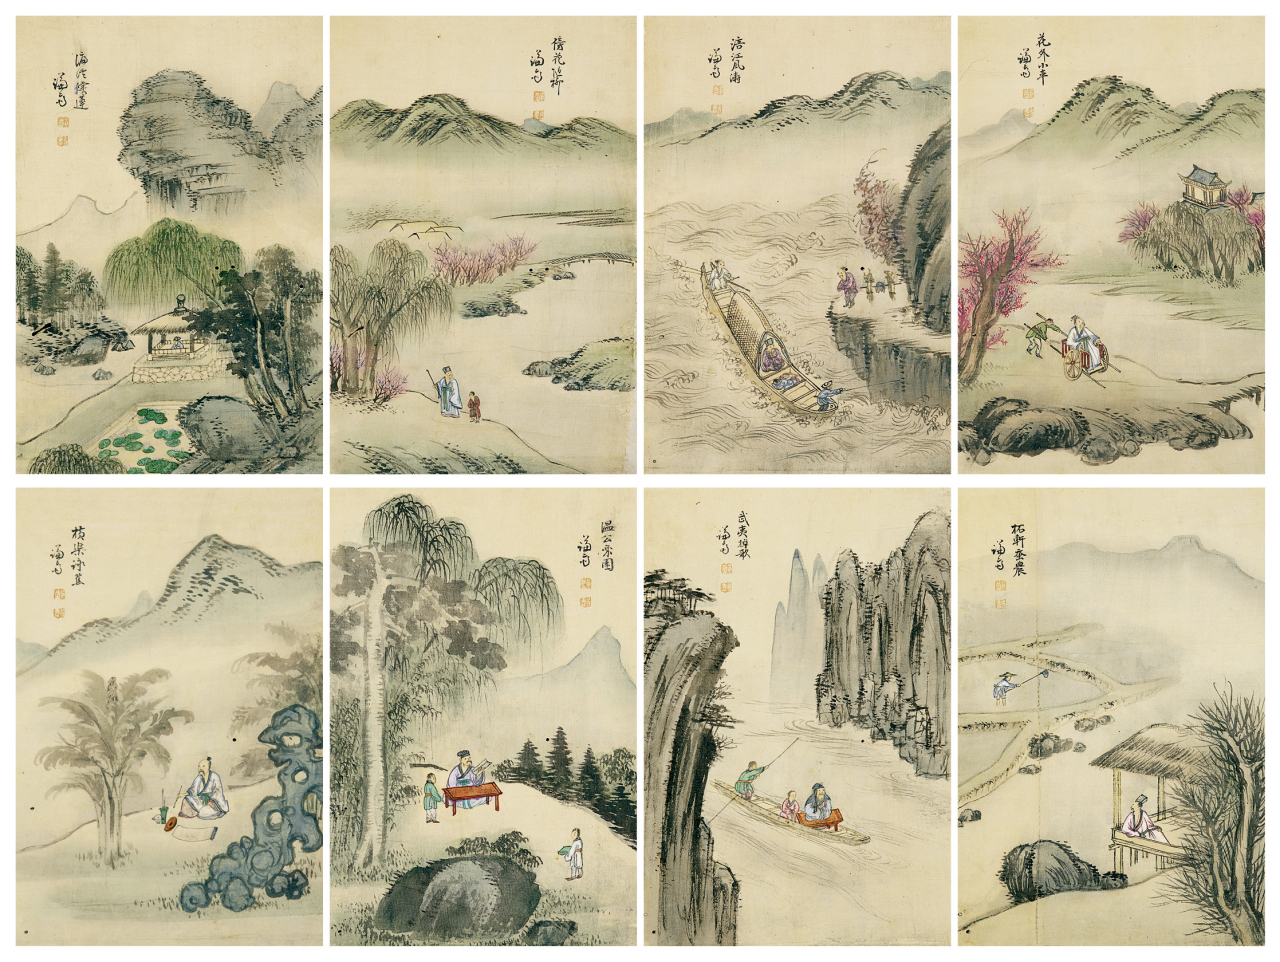 Songyu palhyeondo (eight Confucian scholars of the Song dynasty) by Jeong Seon from the painting album designated as Treasure 1796 (K Auction)